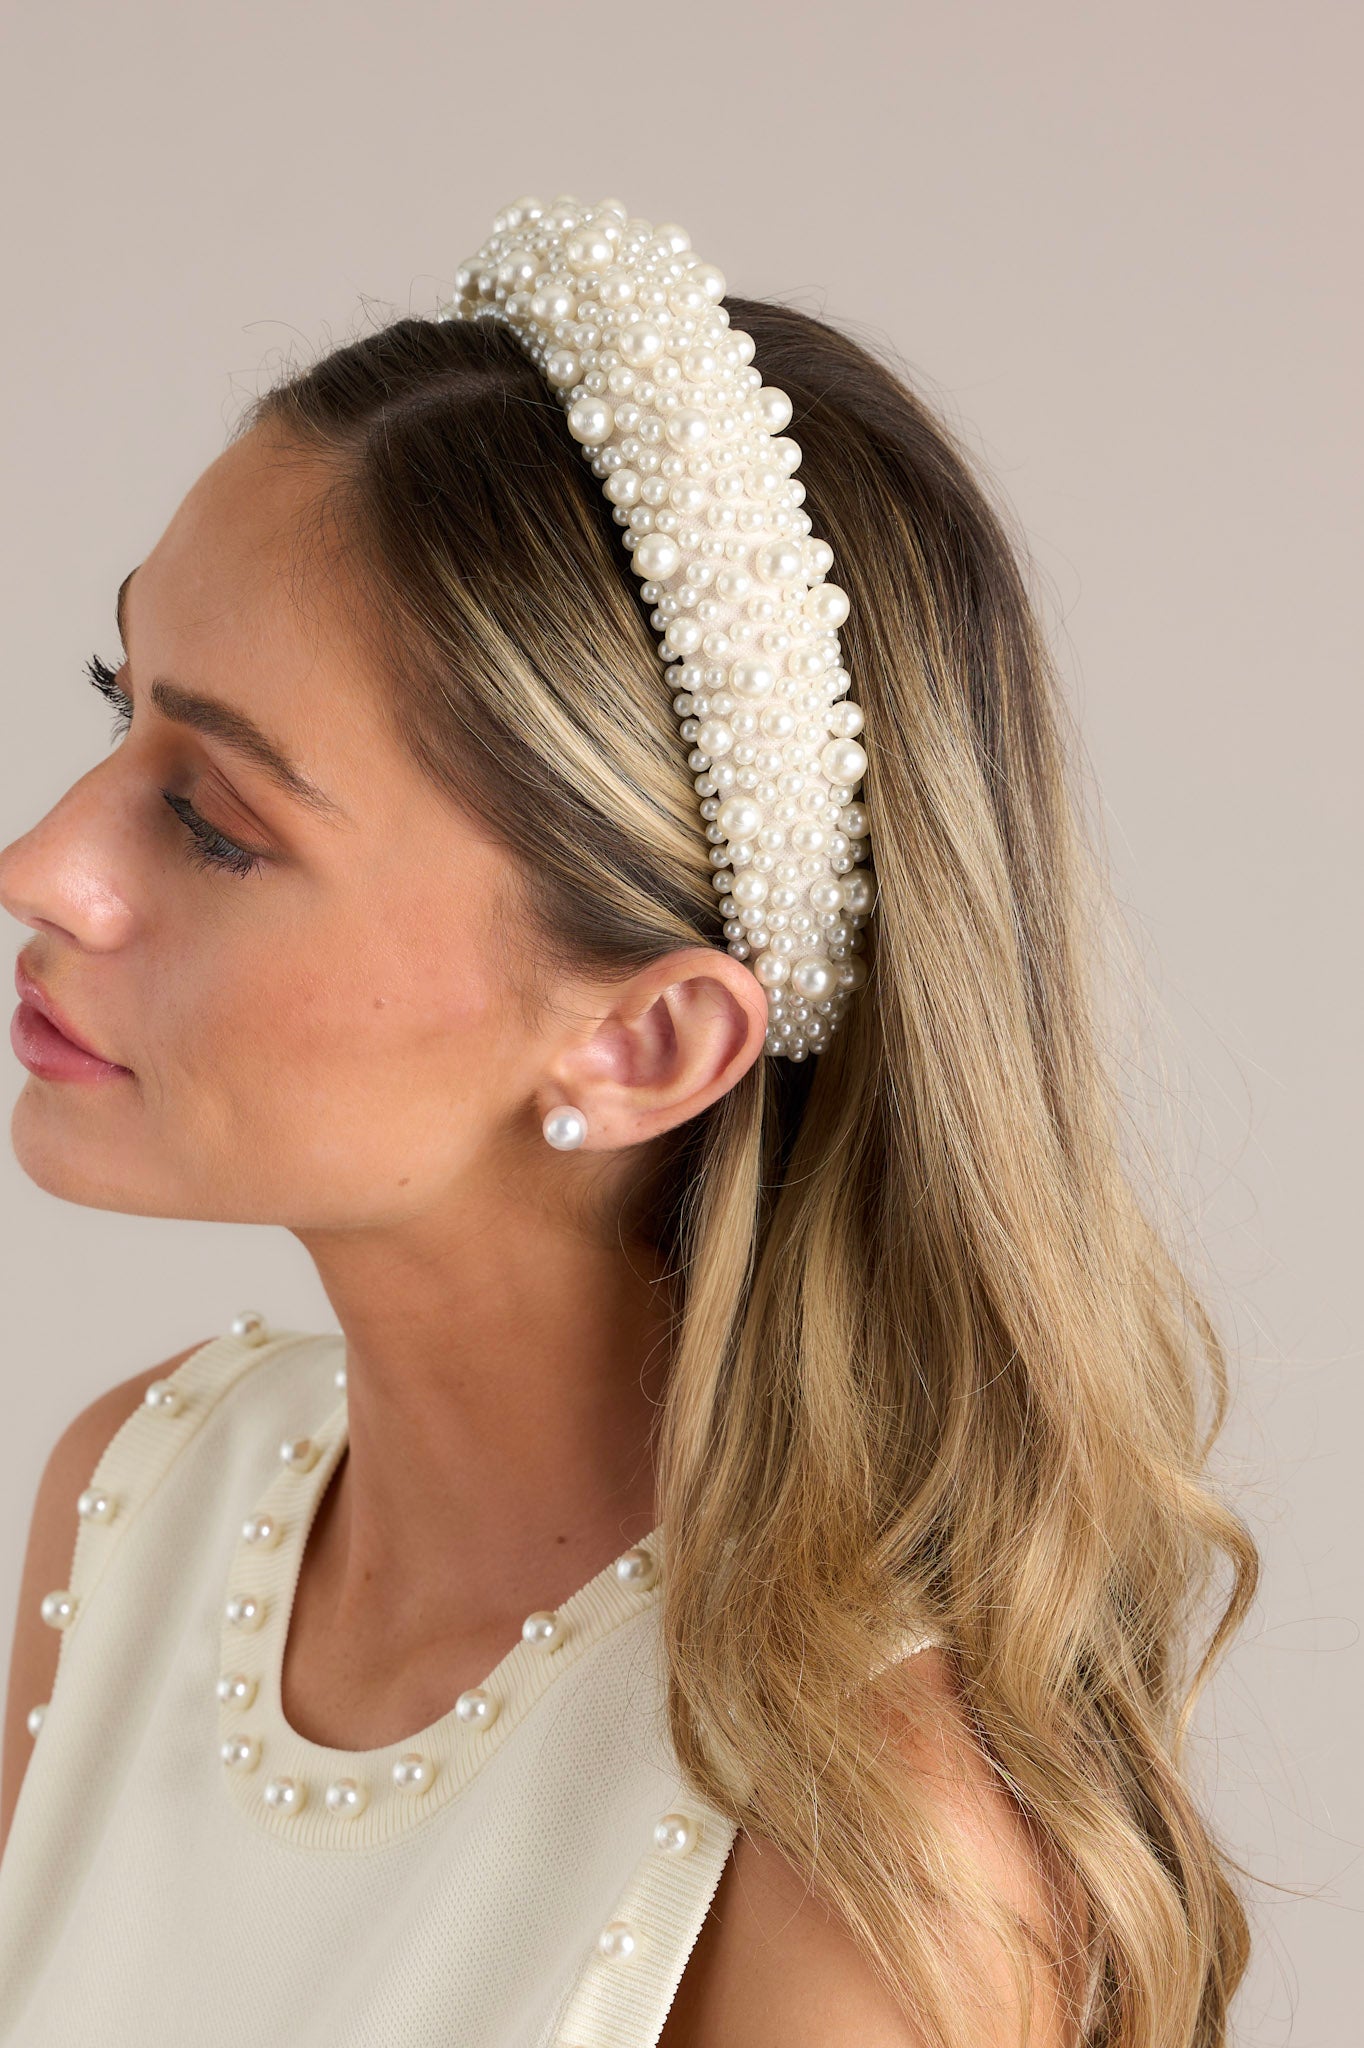 Side view of this headband that is adorned with many white faux pearls varying in size, and a thick band.